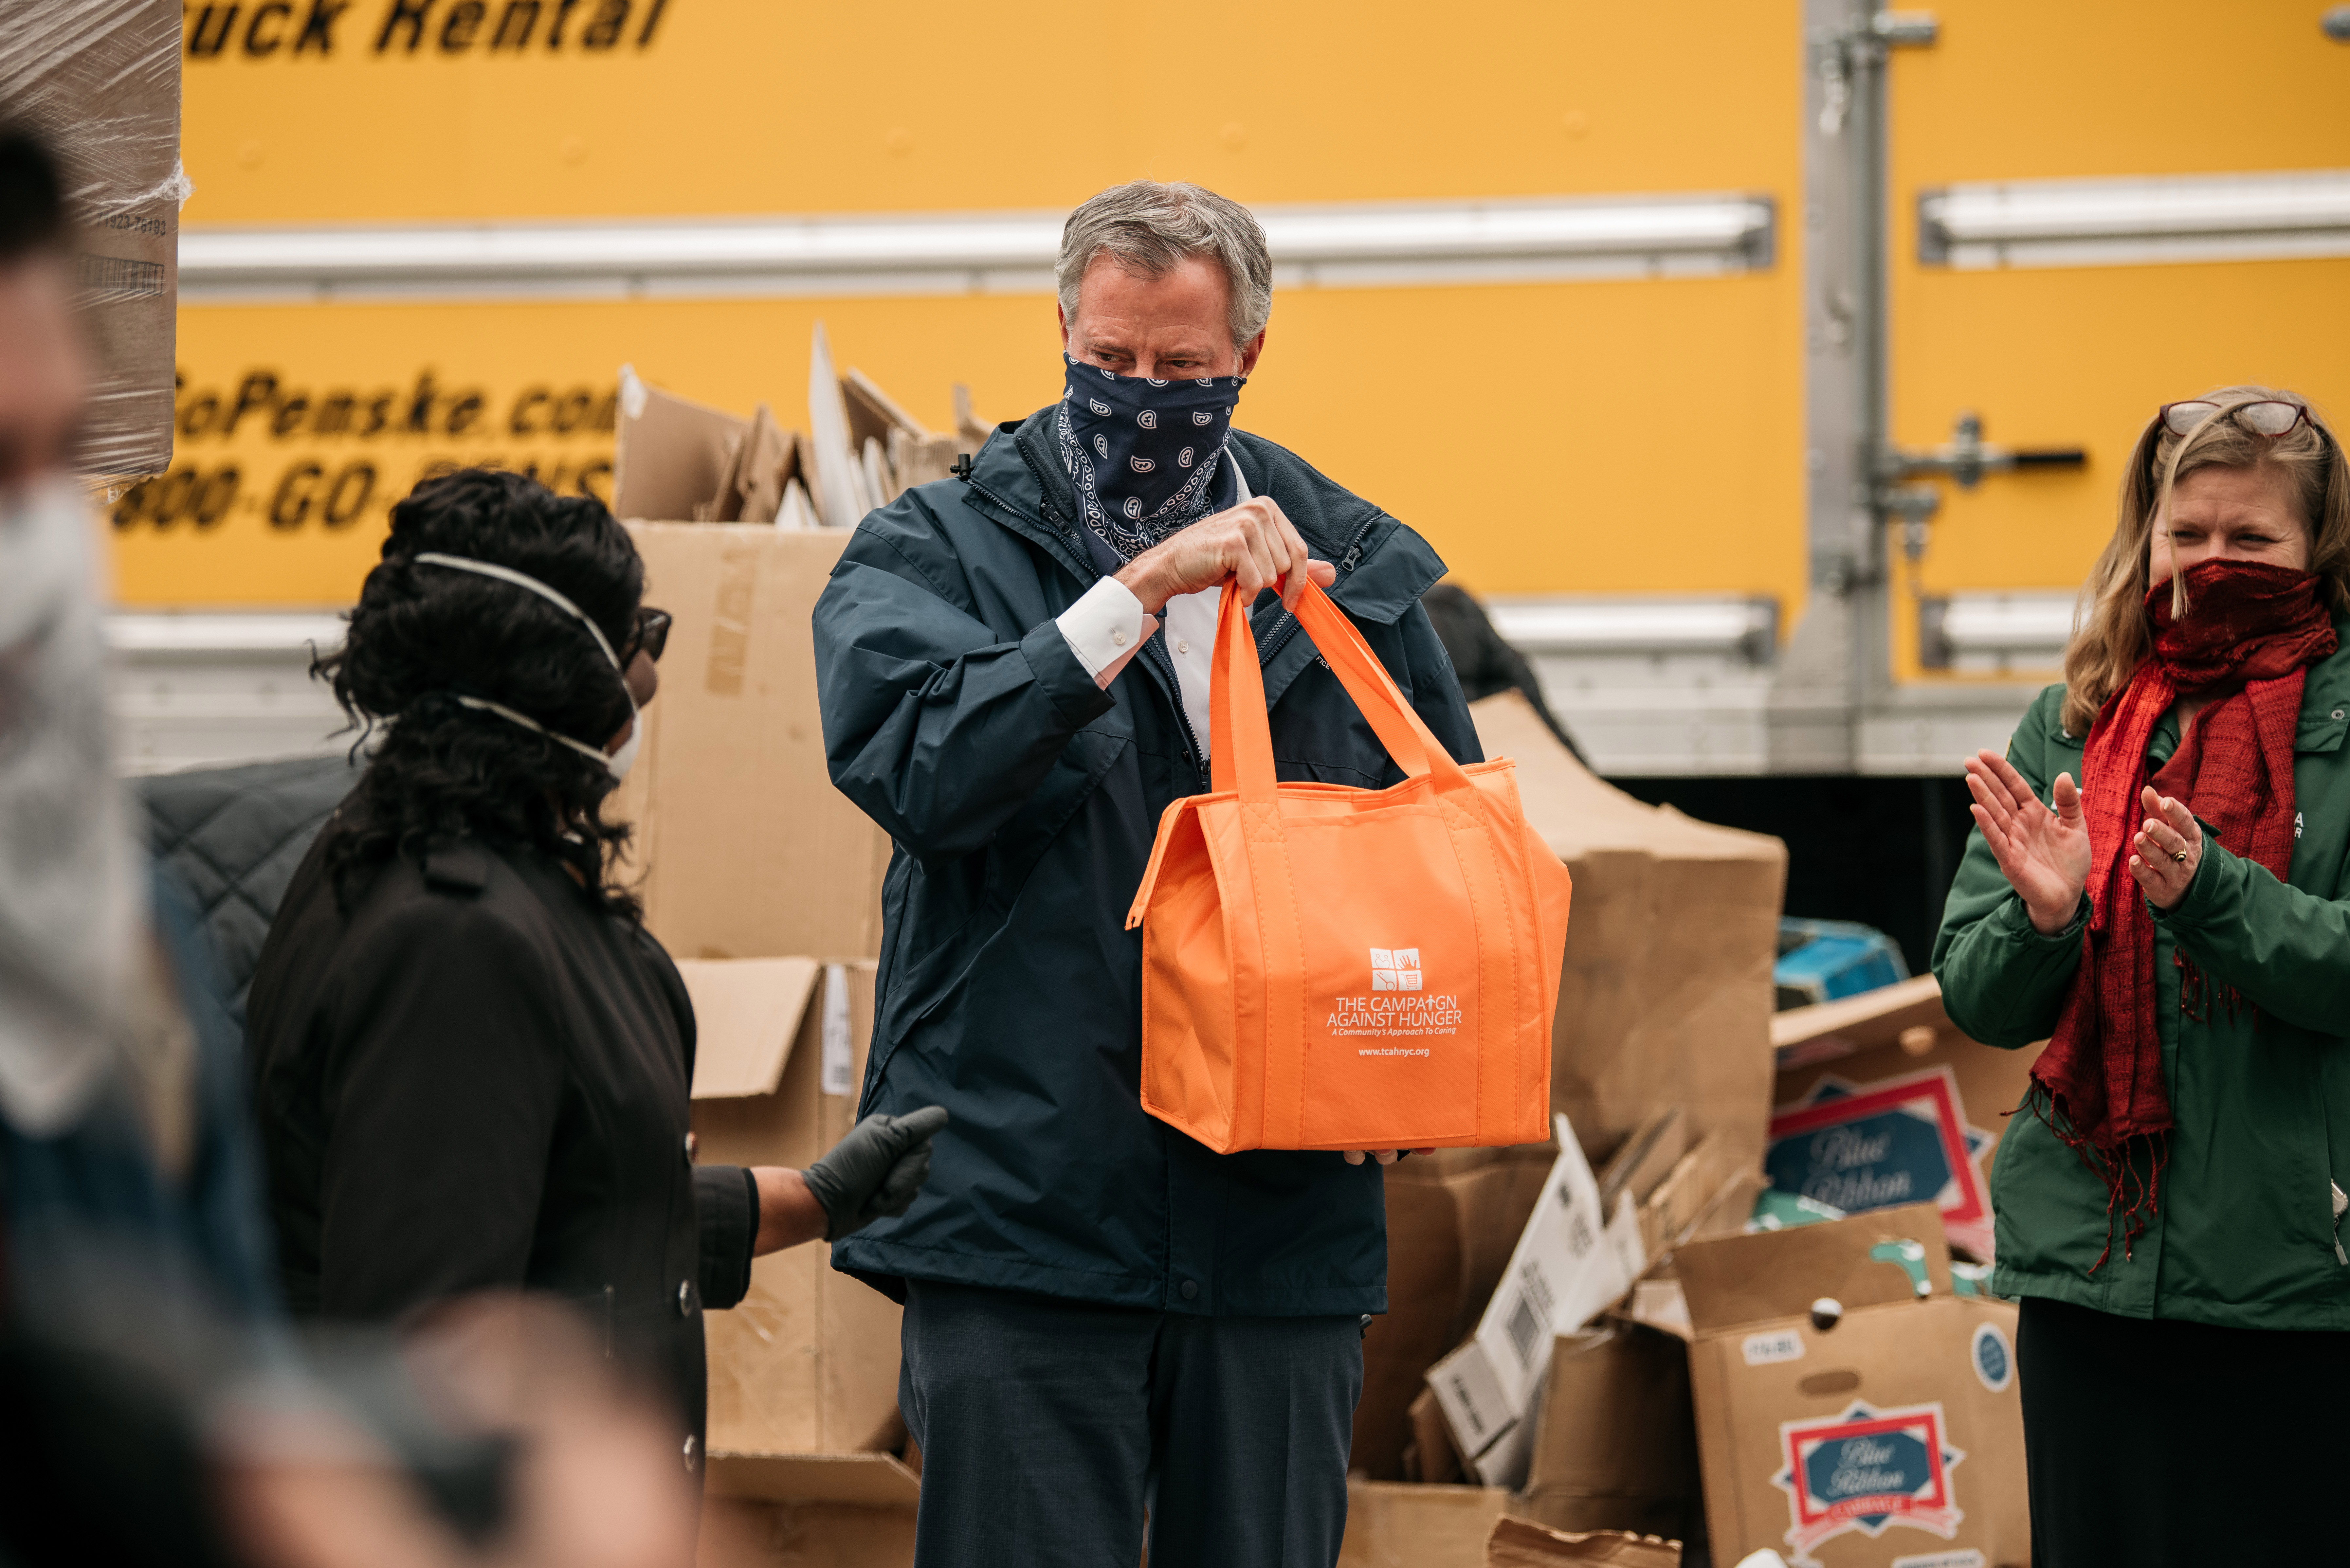 New York City Mayor Bill de Blasio holds a bag of produce packed at a food shelf organized by The Campaign Against Hunger in Bed Stuy, Brooklyn, on April 14.